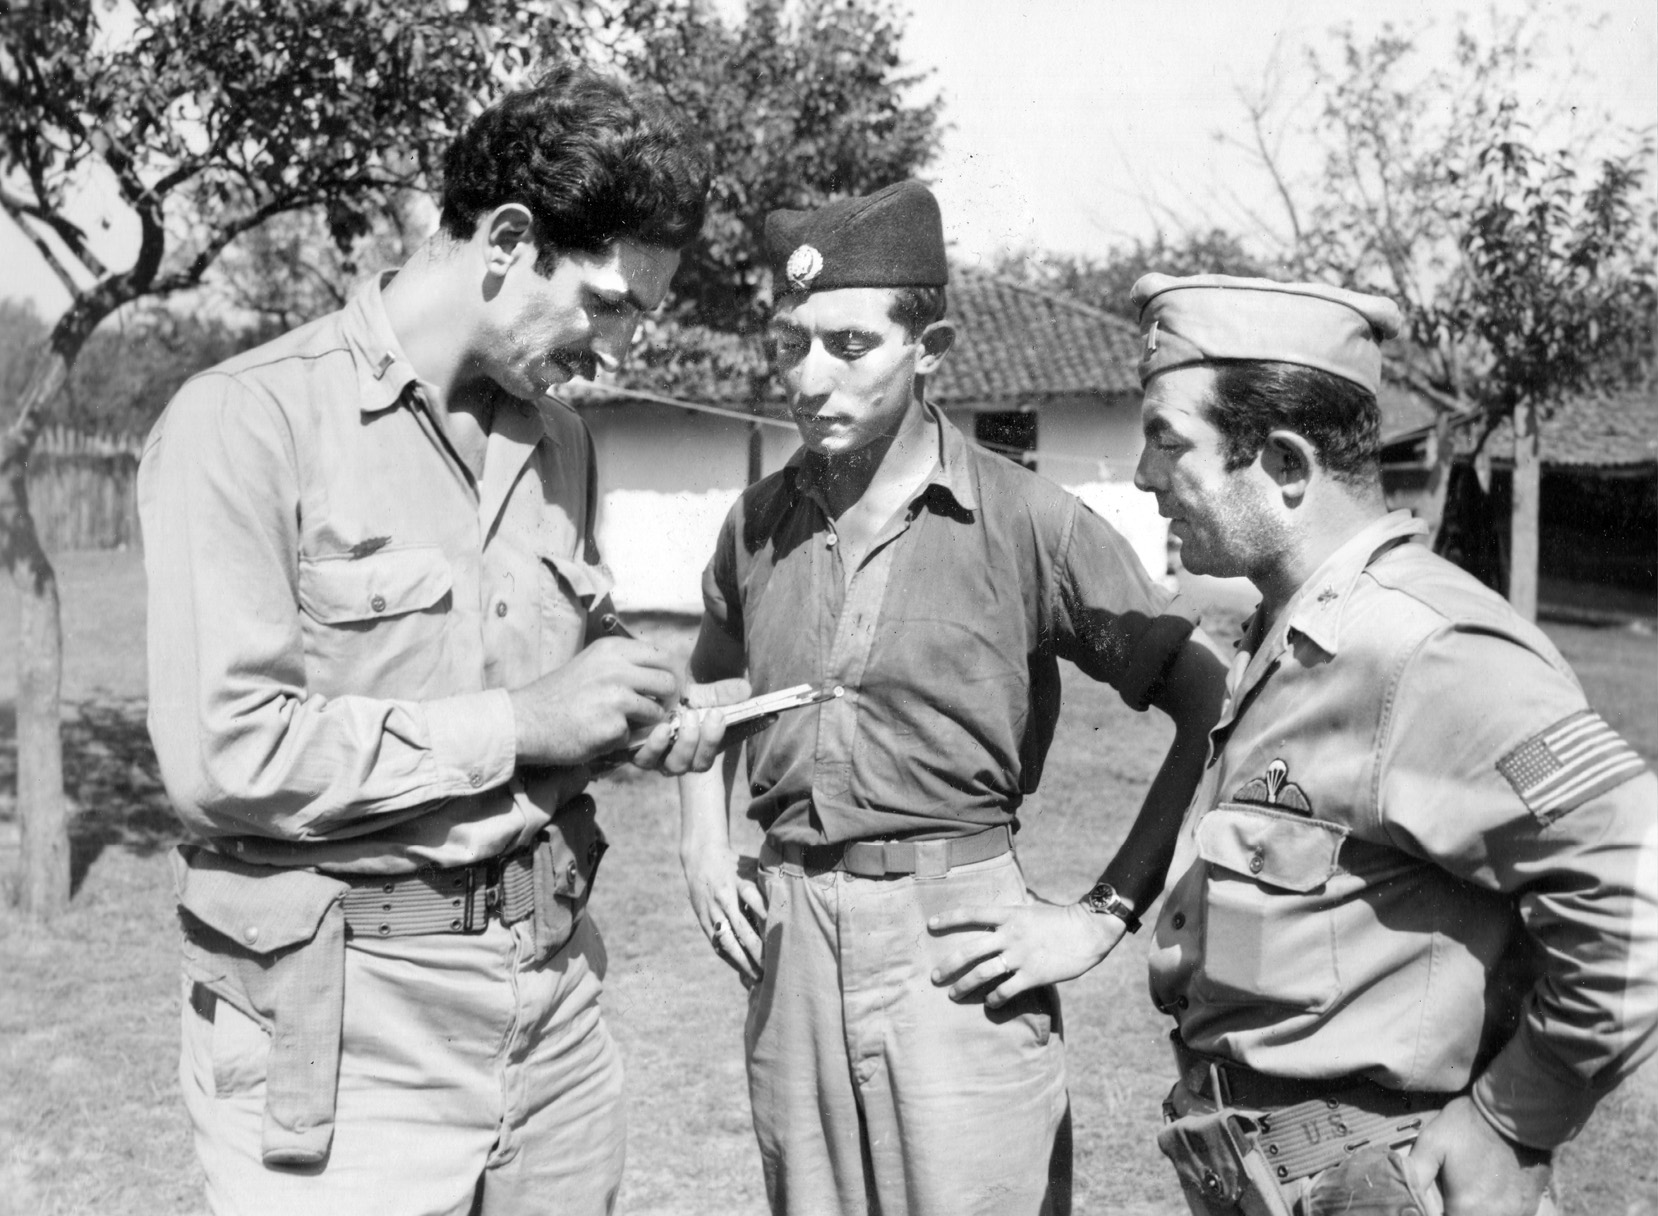 Lieutenant Lloyd G. Hargrave (center), a P-51 Mustang fighter pilot who was shot down 10 miles south of the Yugoslav capital of Belgrade, is questioned by OSS Captain Nick Lalich (left) and OSS Lieutenant Mike Rajacich (right).